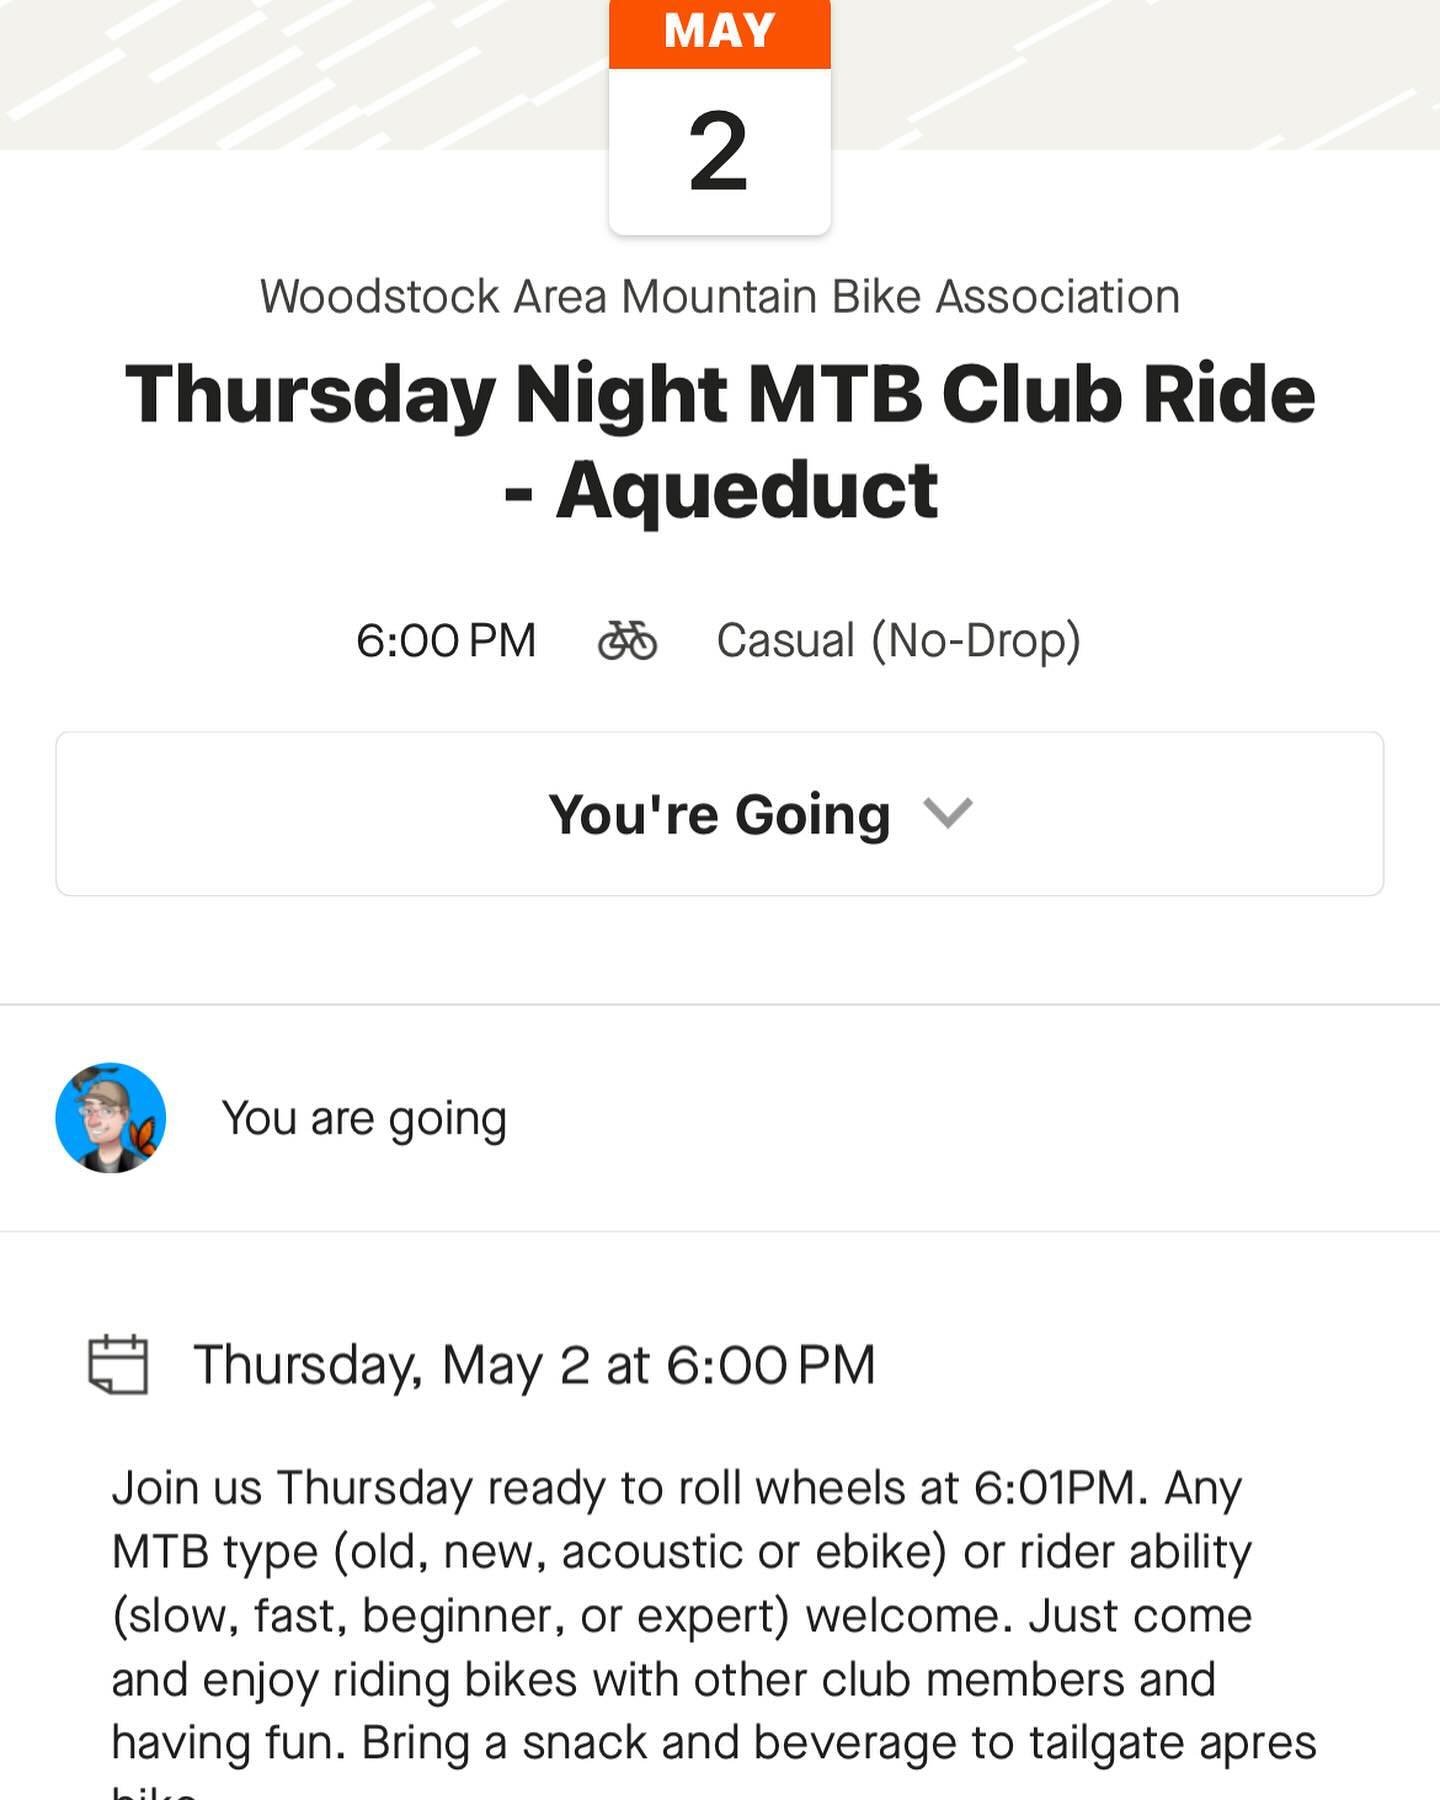 Join us Thursday ready to roll wheels at 6:01PM. Any MTB type (old, new, acoustic or ebike) or rider ability (slow, fast, beginner, or expert) welcome. Just come and enjoy riding bikes with other club members and having fun. Bring a snack and beverag